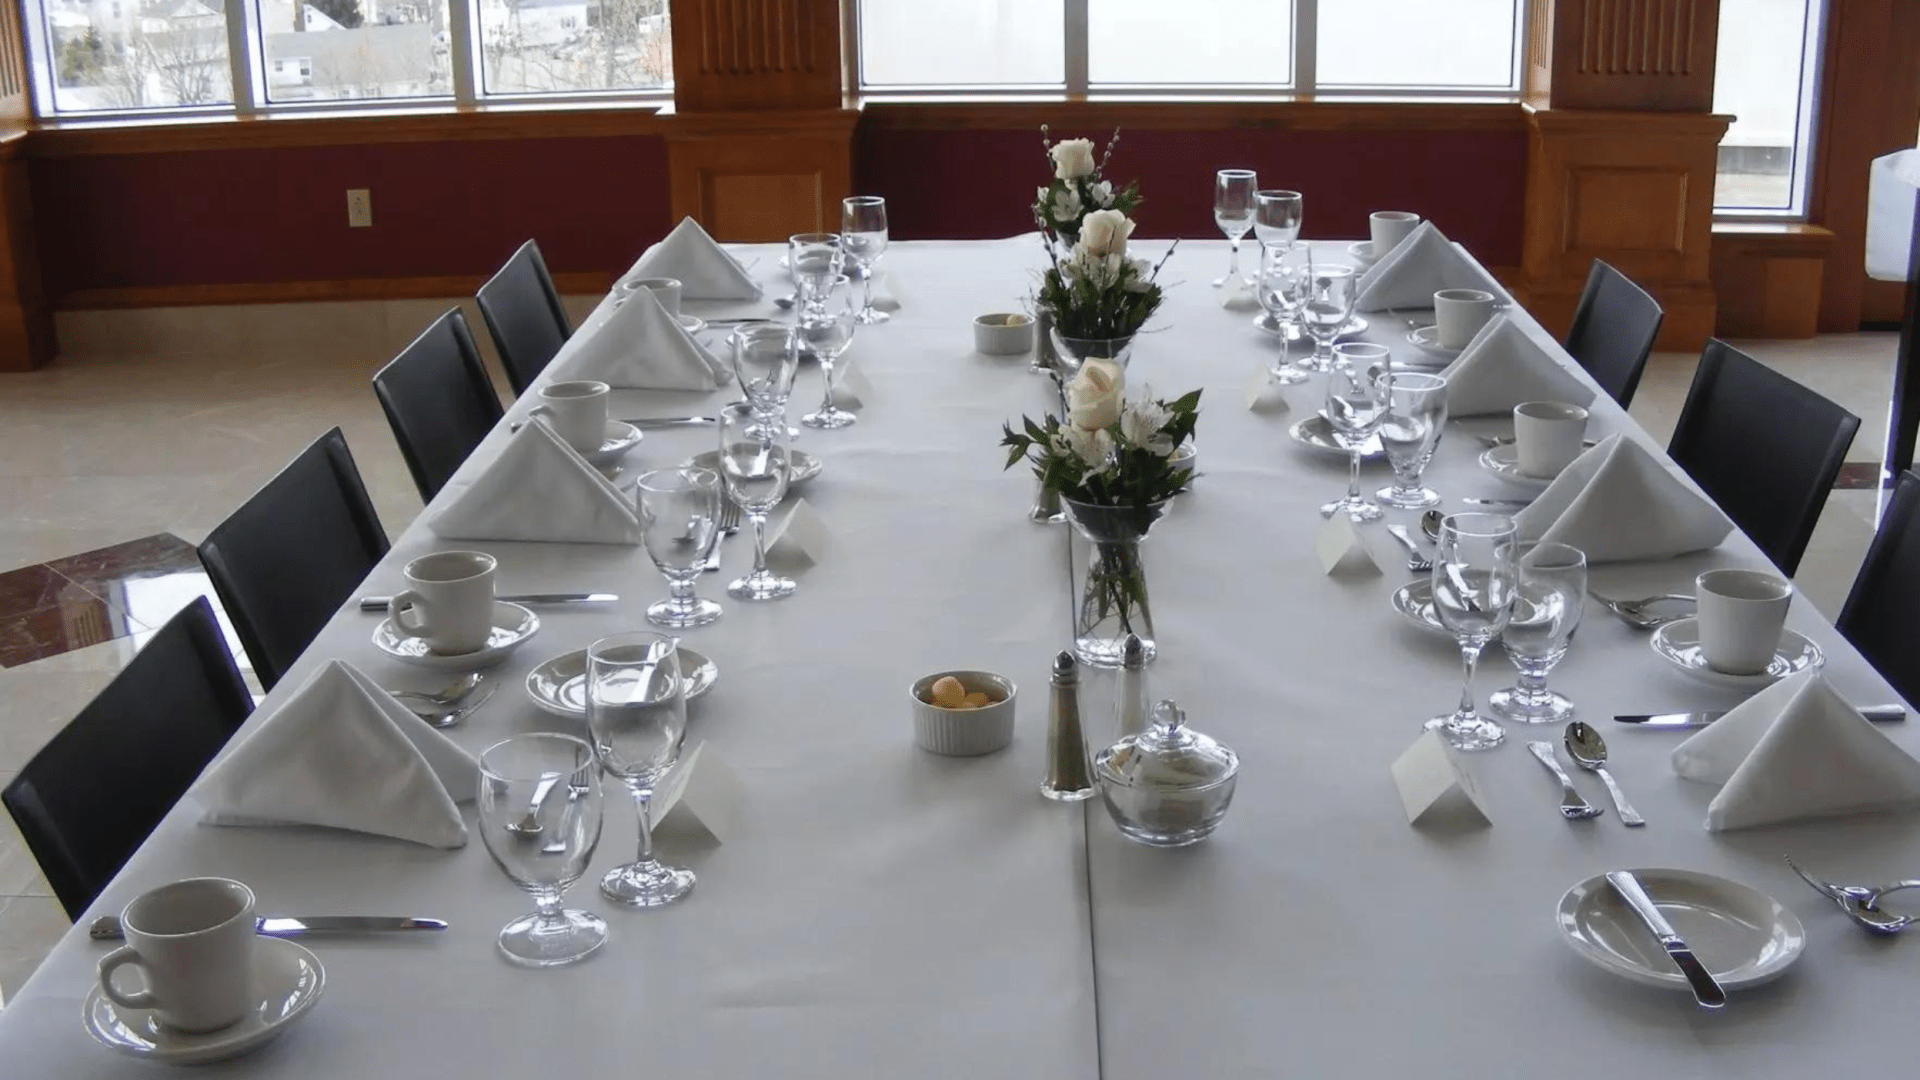 A table set up for formal dining